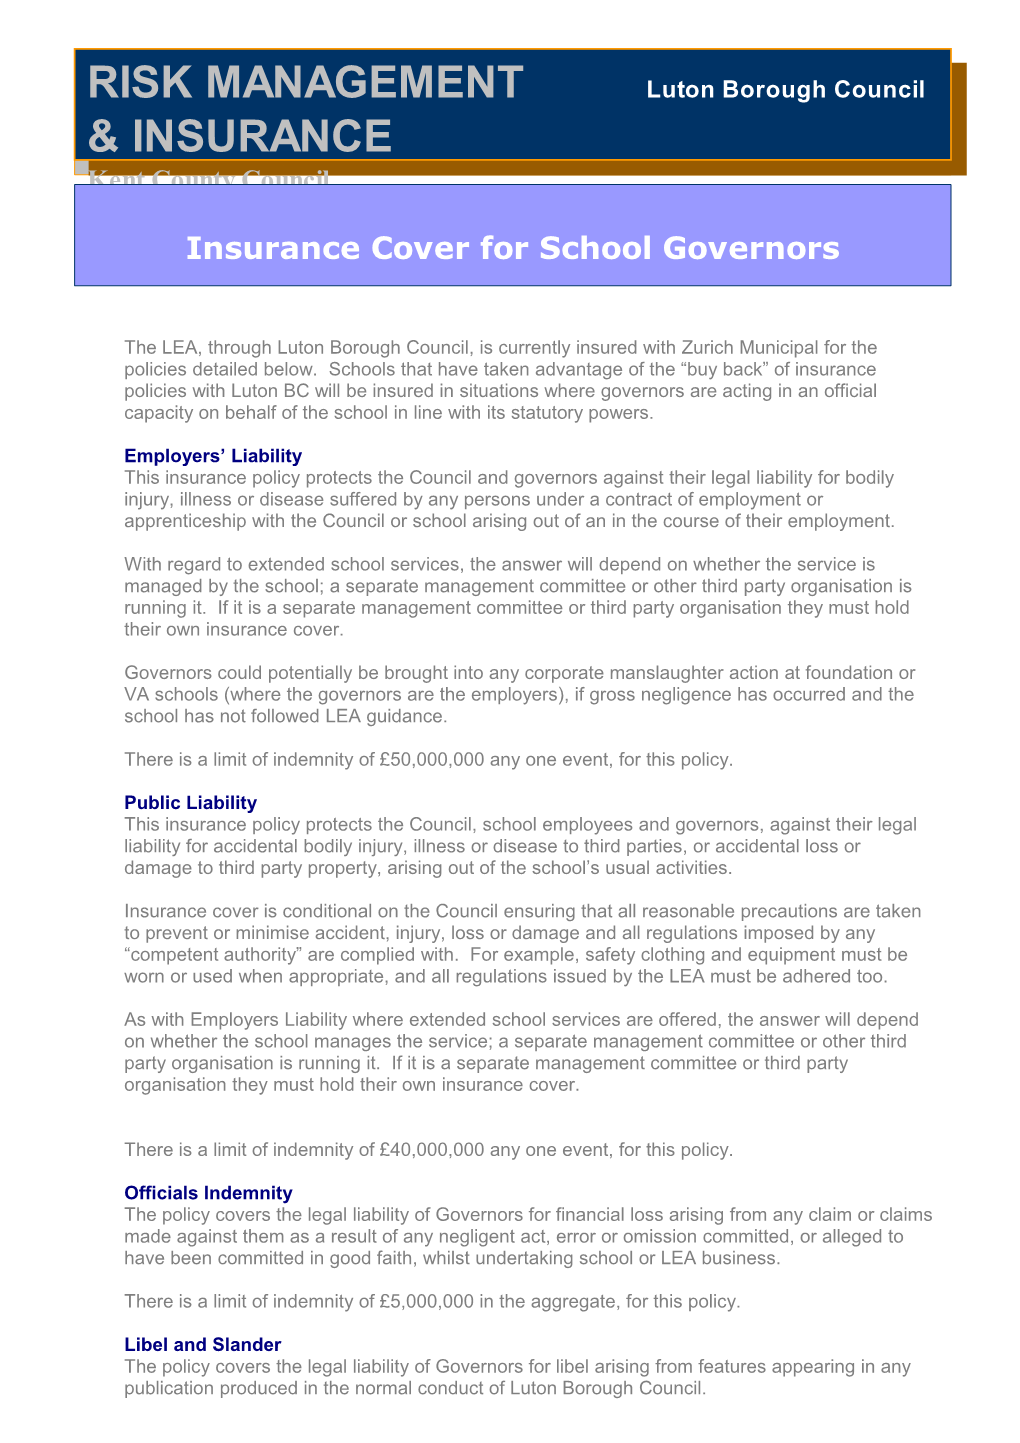 Insurance Cover for Schools